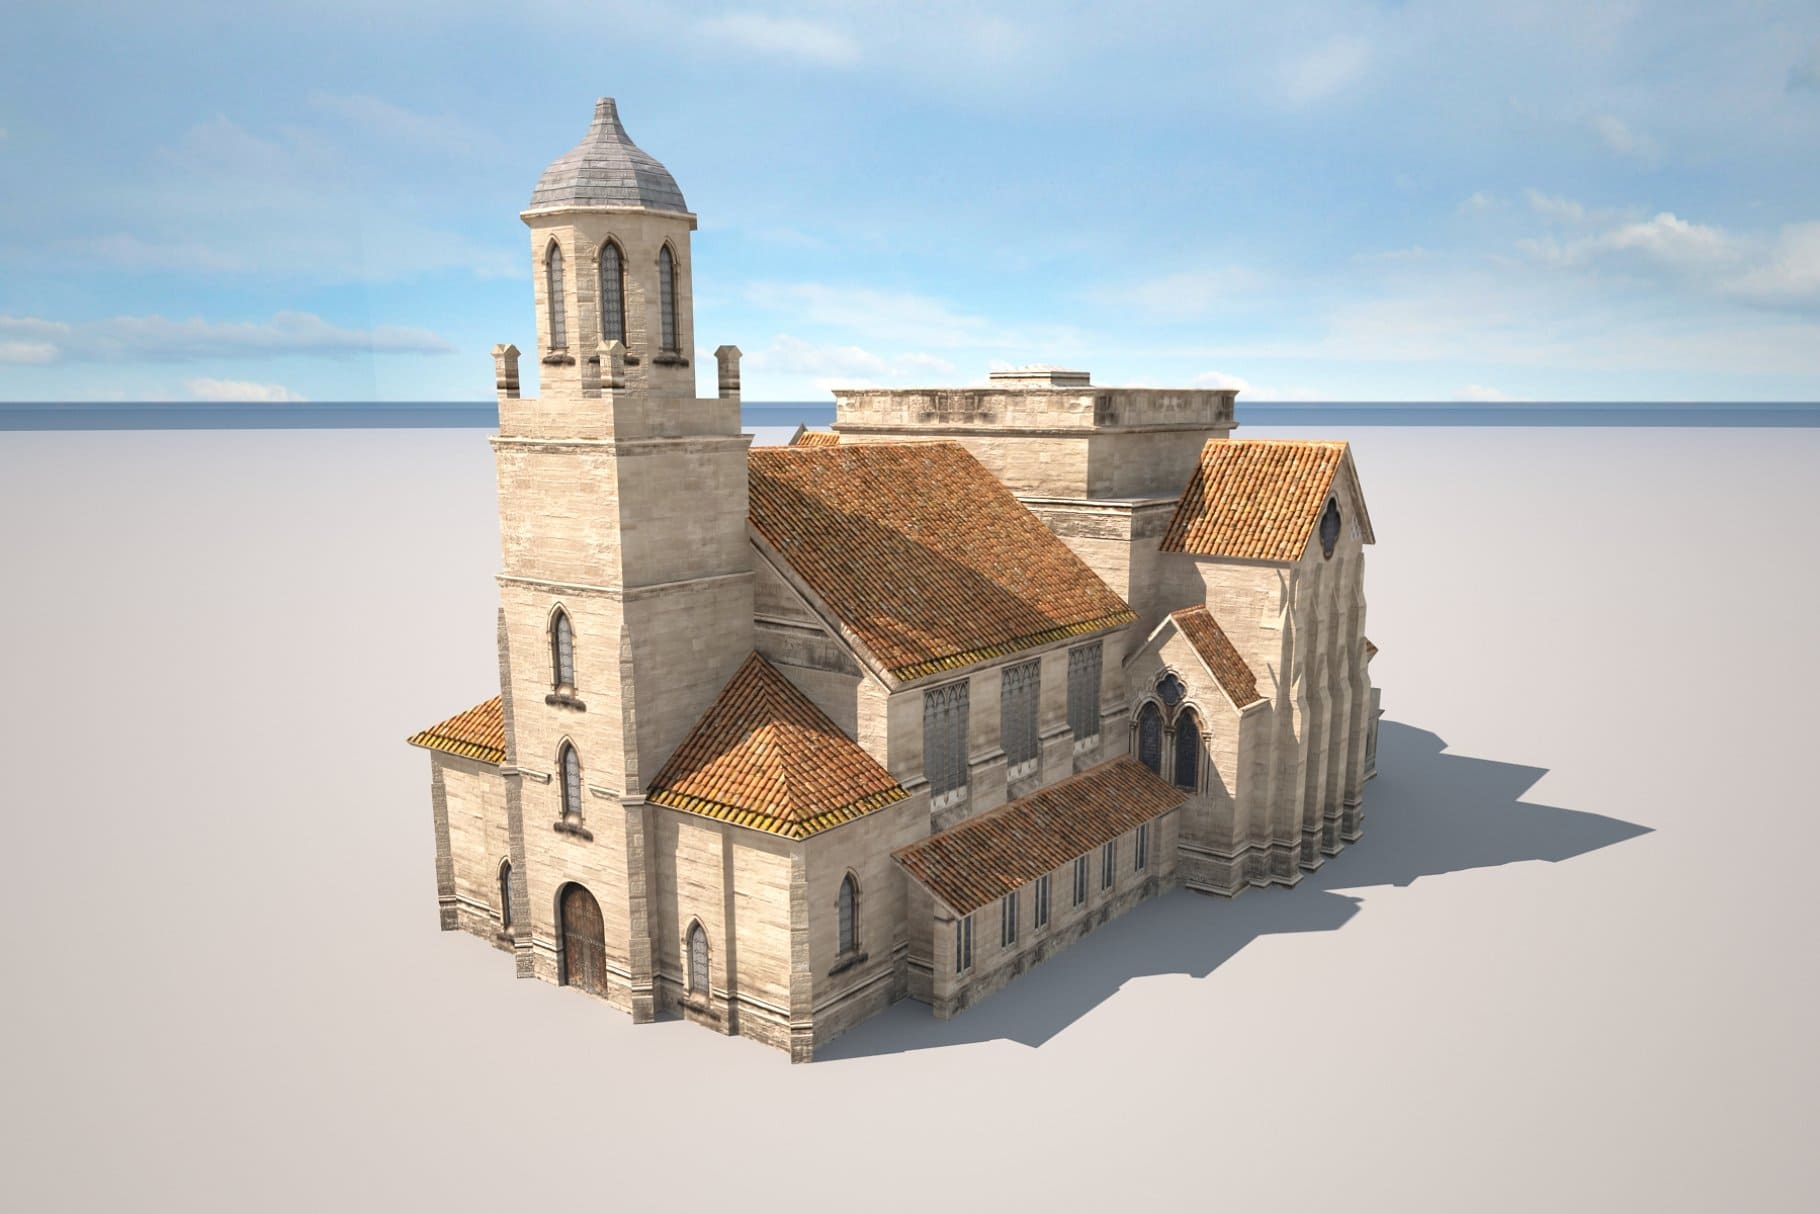 3D model of a church building made of rubble stone and brick.